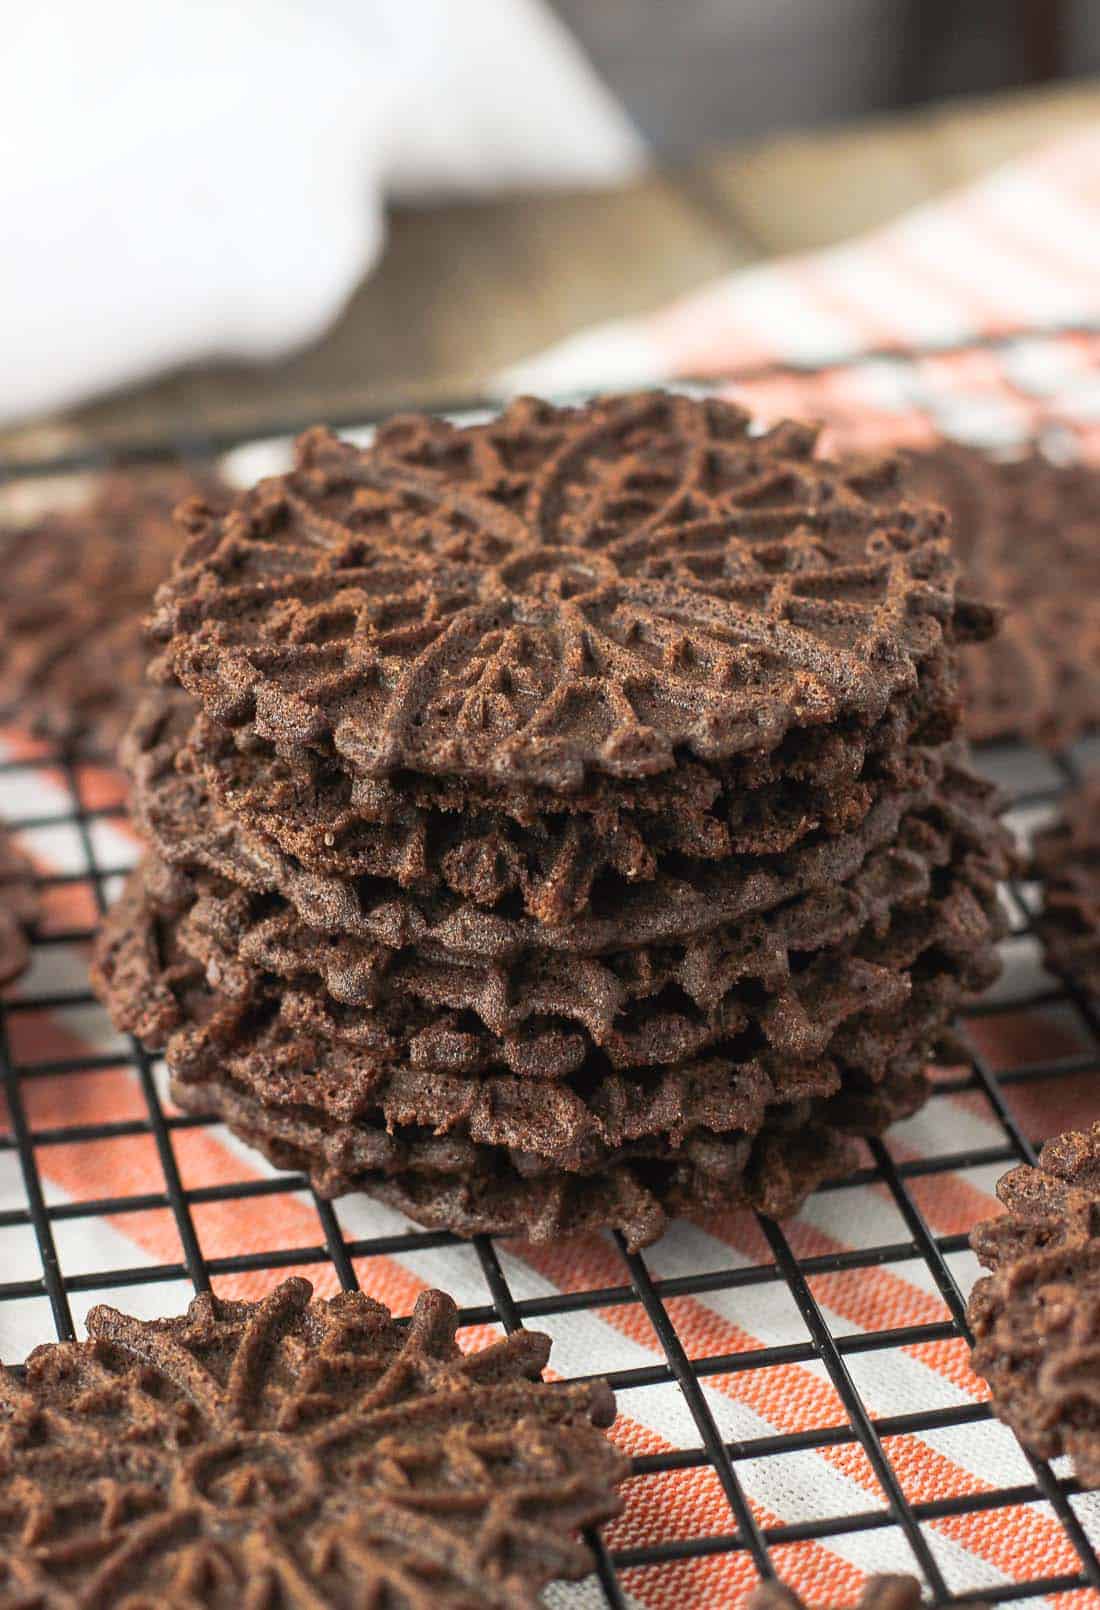 A stack of chocolate pizzelle on a wire rack.